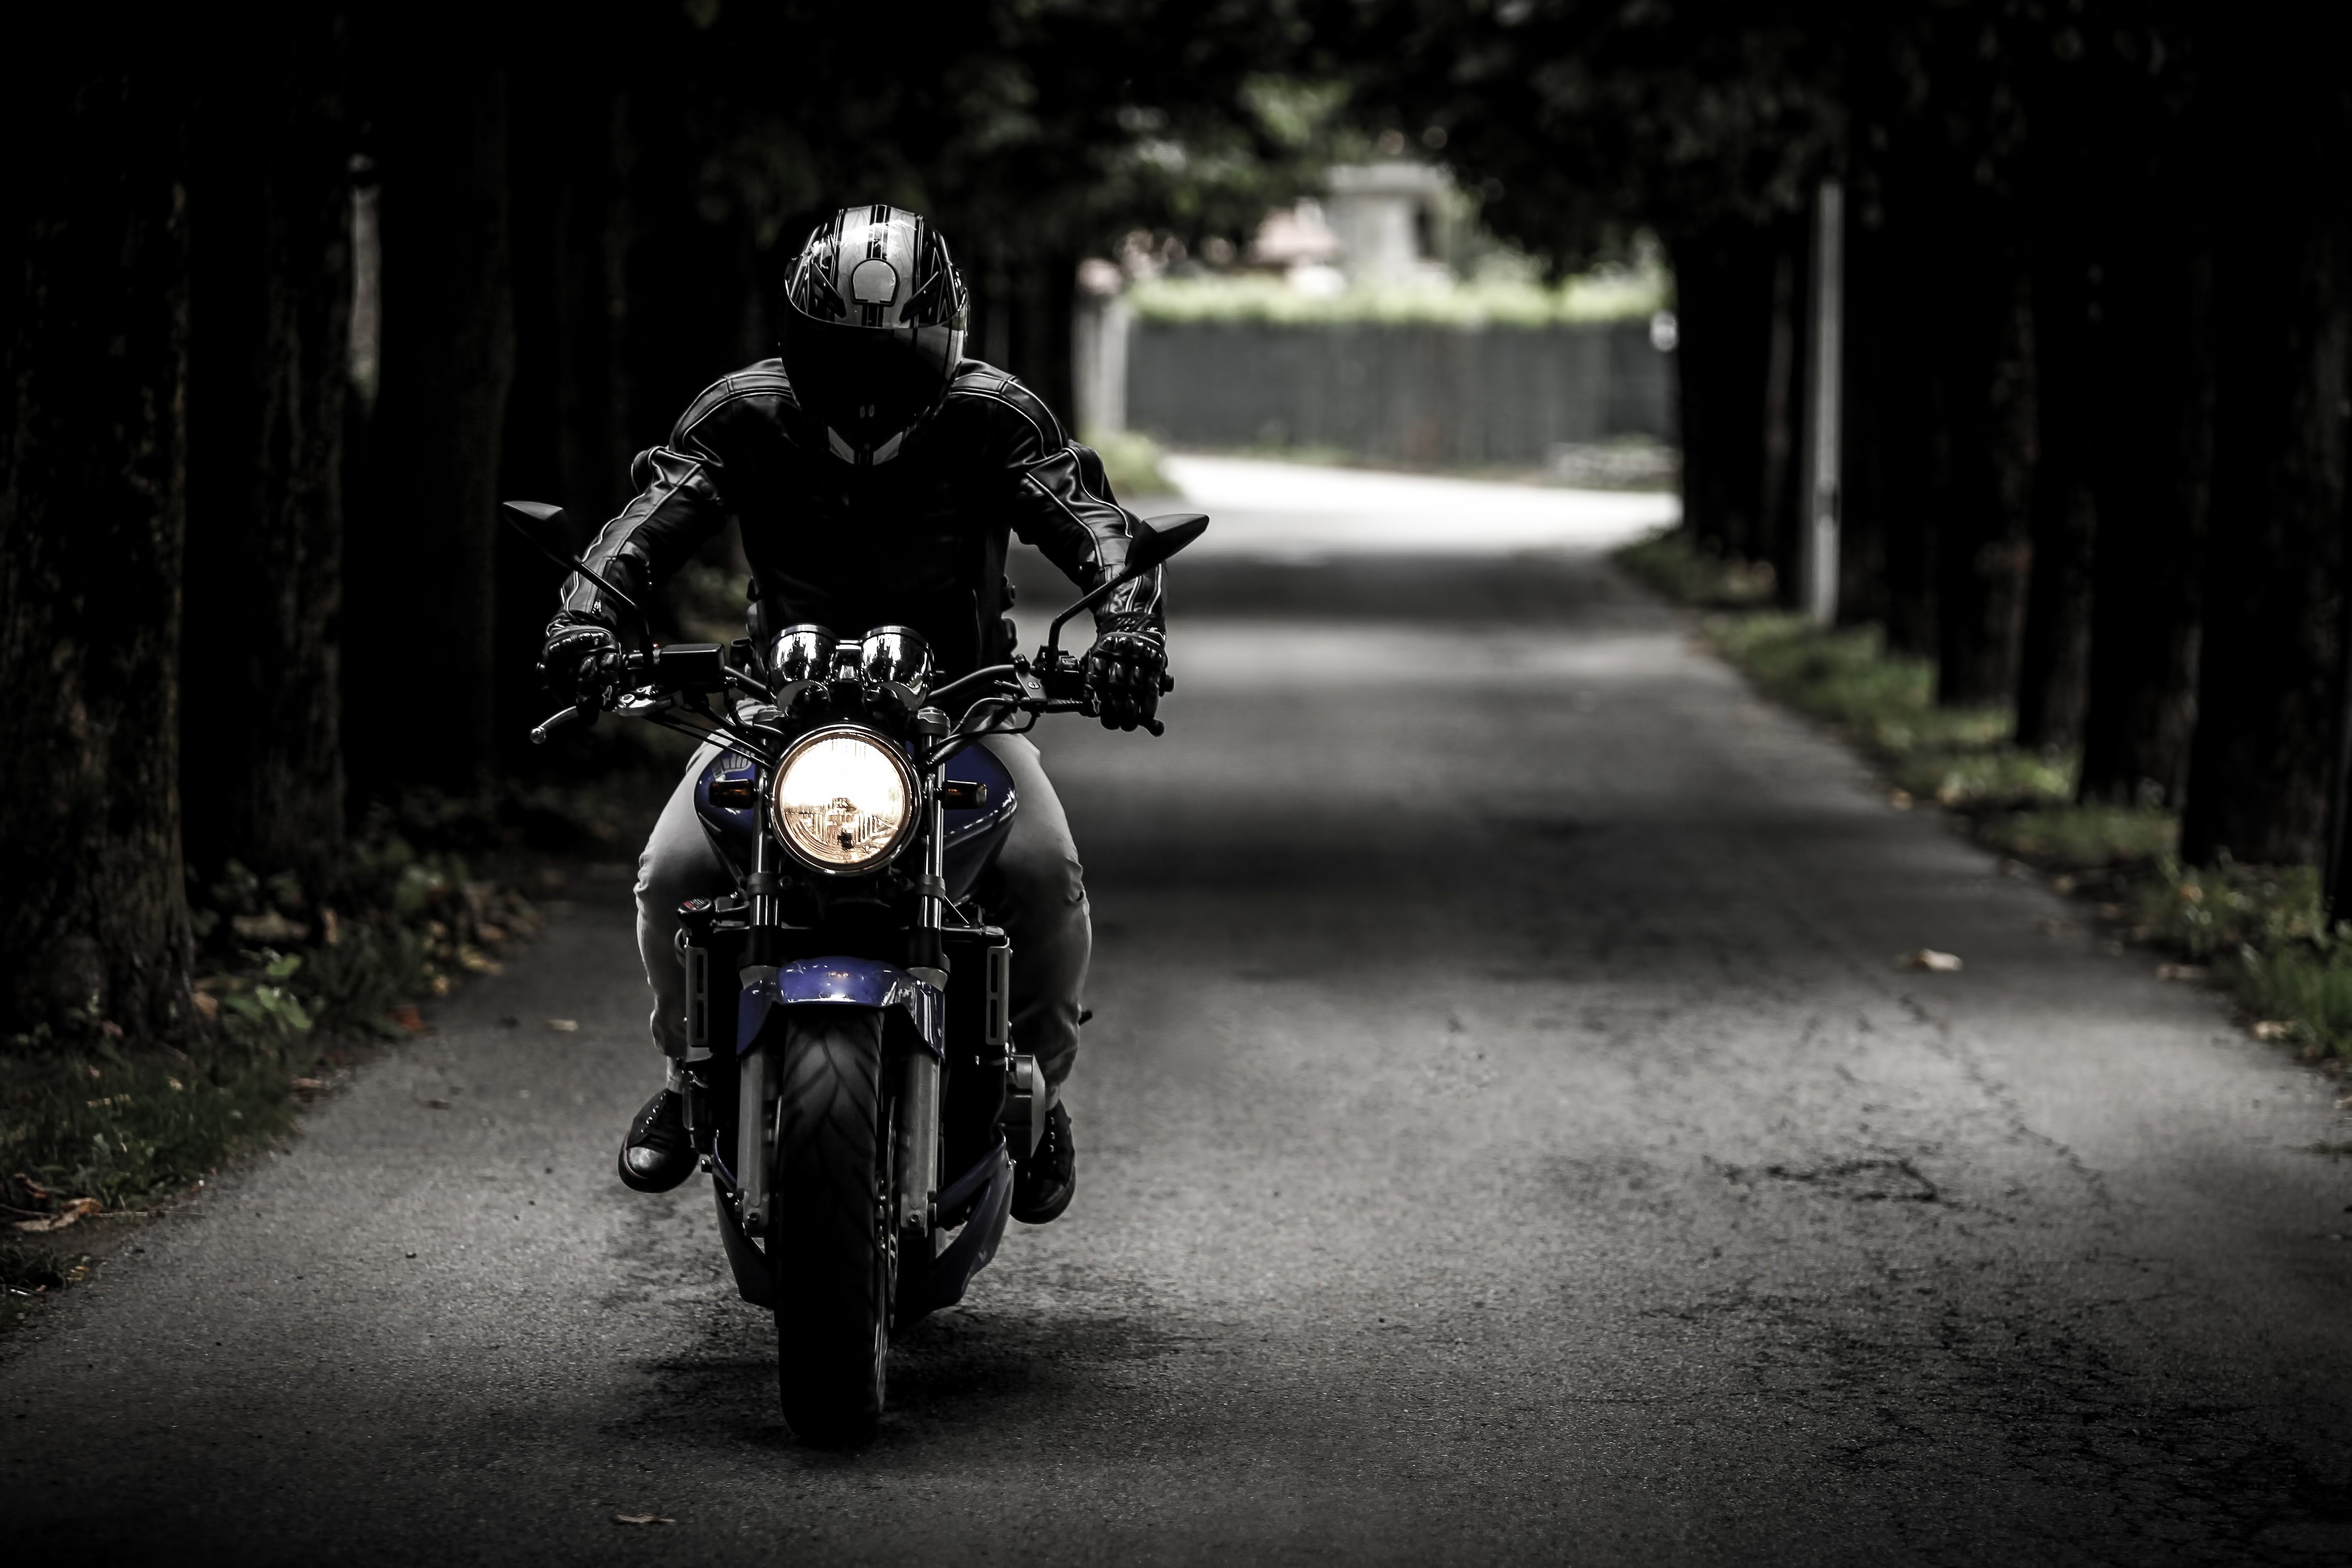 traffic, motorcycle, motorcycles, motorcyclist Windows Mobile Wallpaper